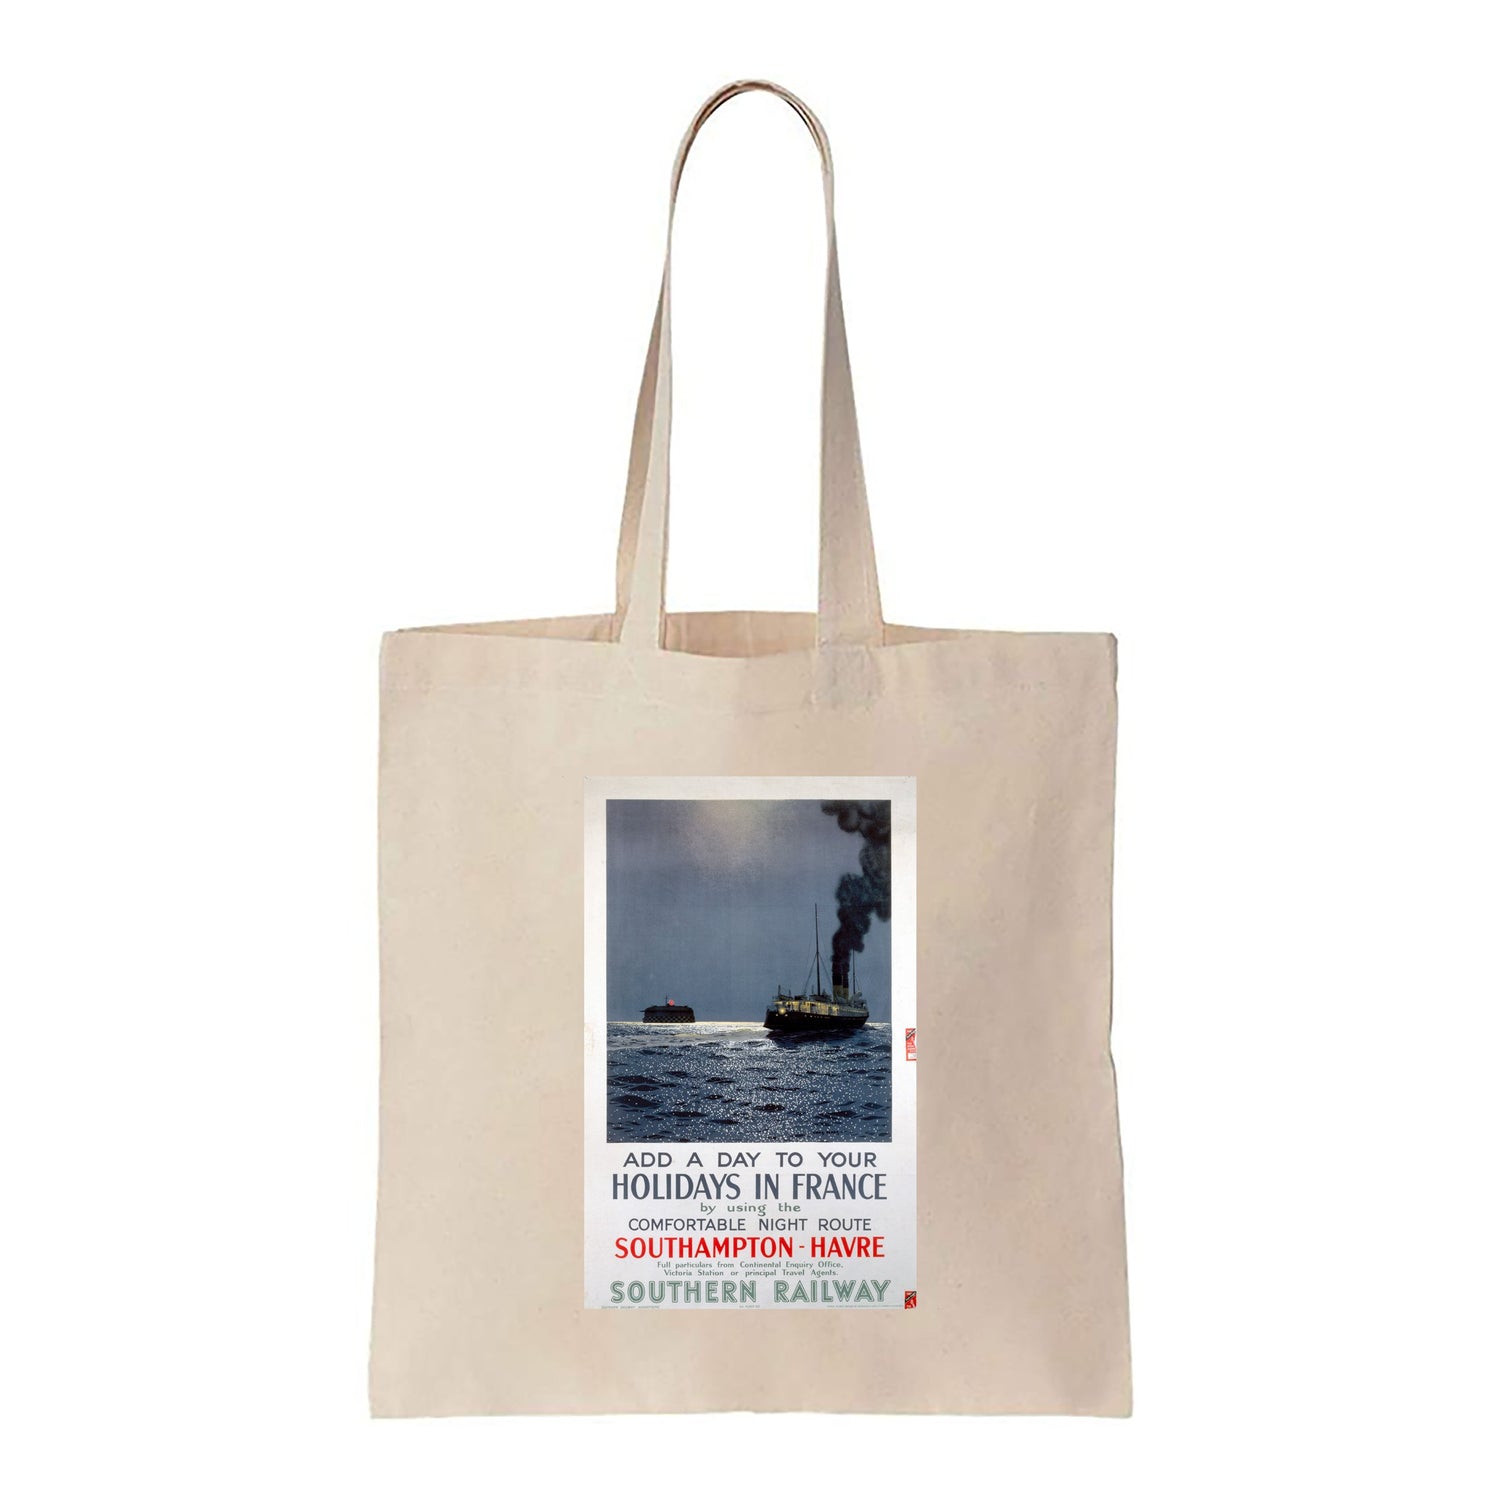 Holidays in France - Southampton to Havre Southern Railway - Canvas Tote Bag